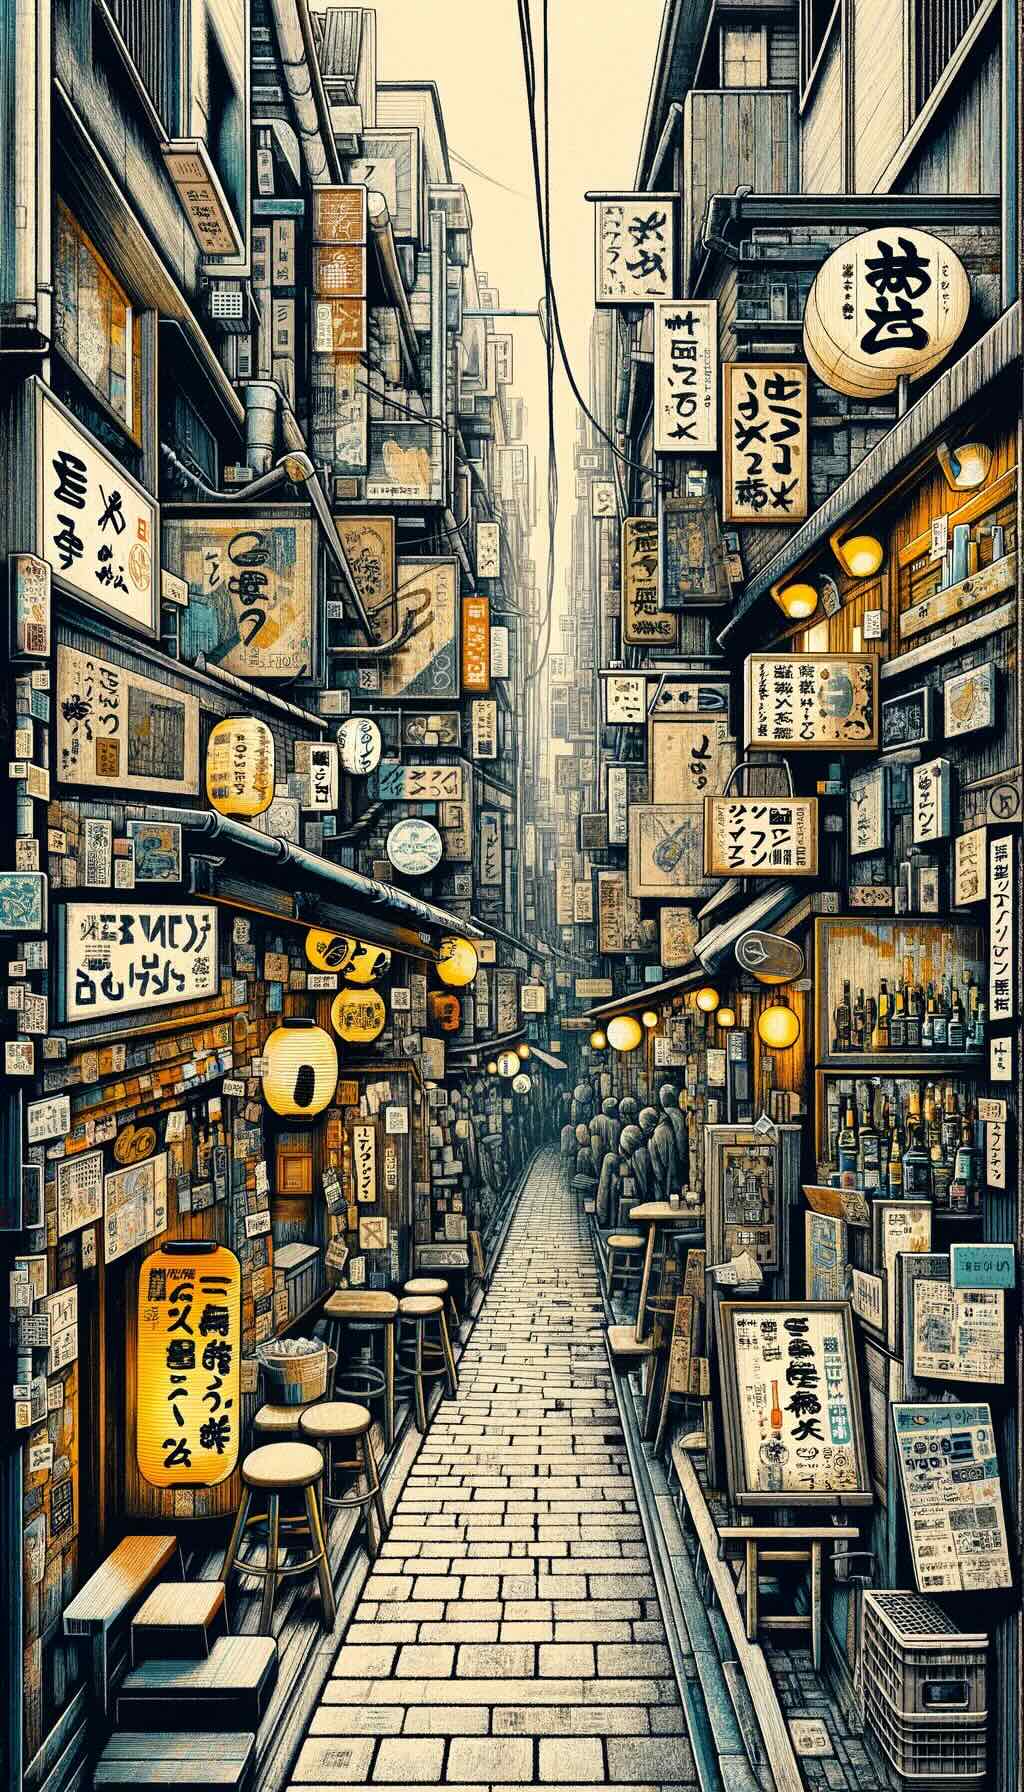 Iconic Golden Gai district in Tokyo showcases the district's maze-like alleys and tiny bars, highlighting its nostalgic and old-world charm. The artwork conveys the intimate and unique experiences offered in Golden Gai, with scenes of narrow lanes lined with aged wooden bars and interiors adorned with vintage décor. The style is abstract and imaginative, reflecting the blend of history and culture in Golden Gai and its significance as a symbol of Tokyo's past amidst modernization